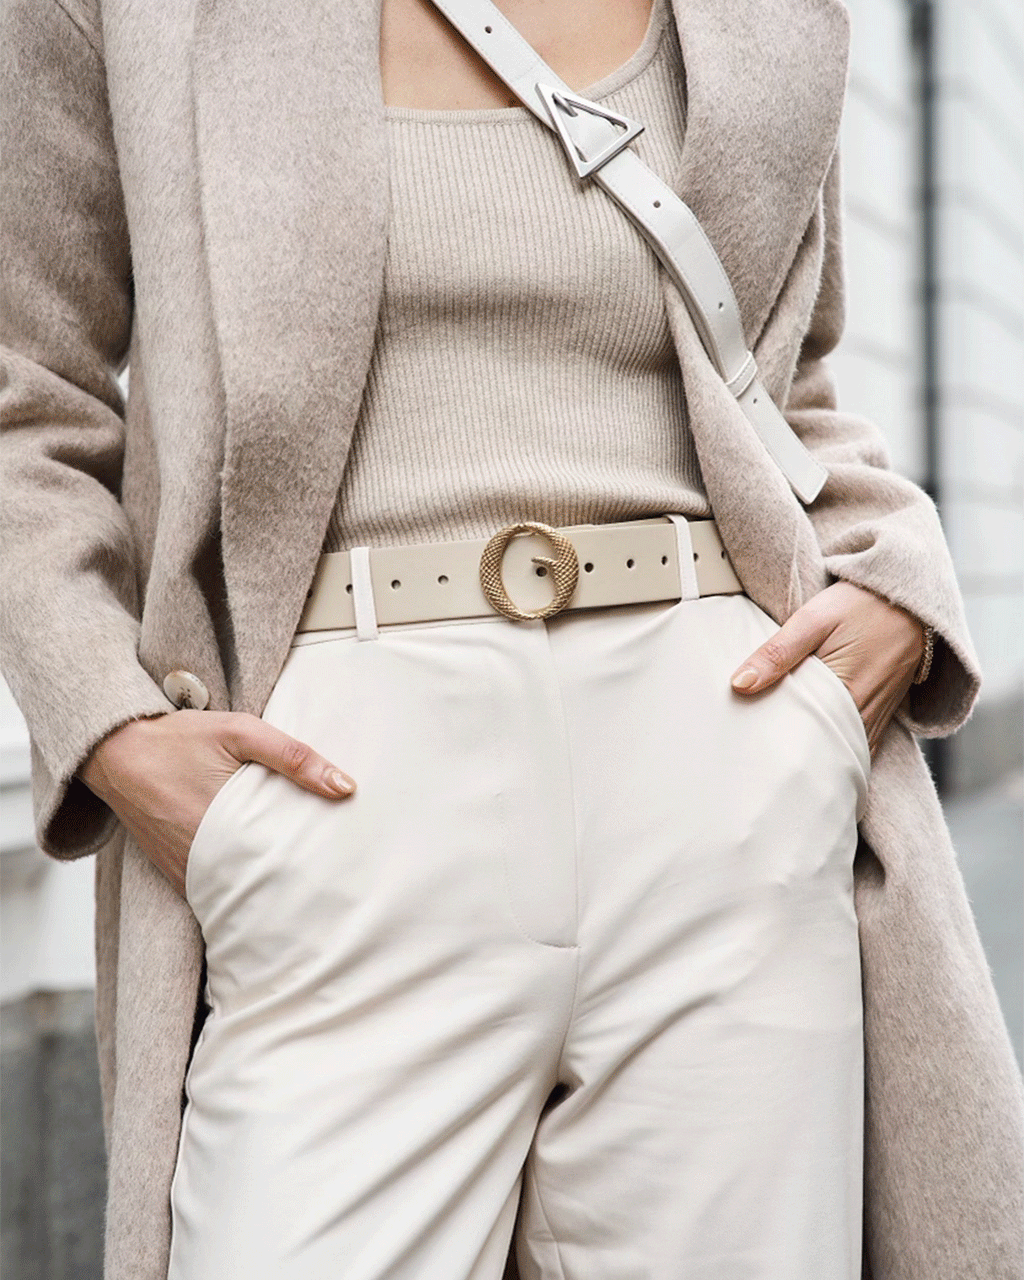 6 ways to style Clinch Belts this winter